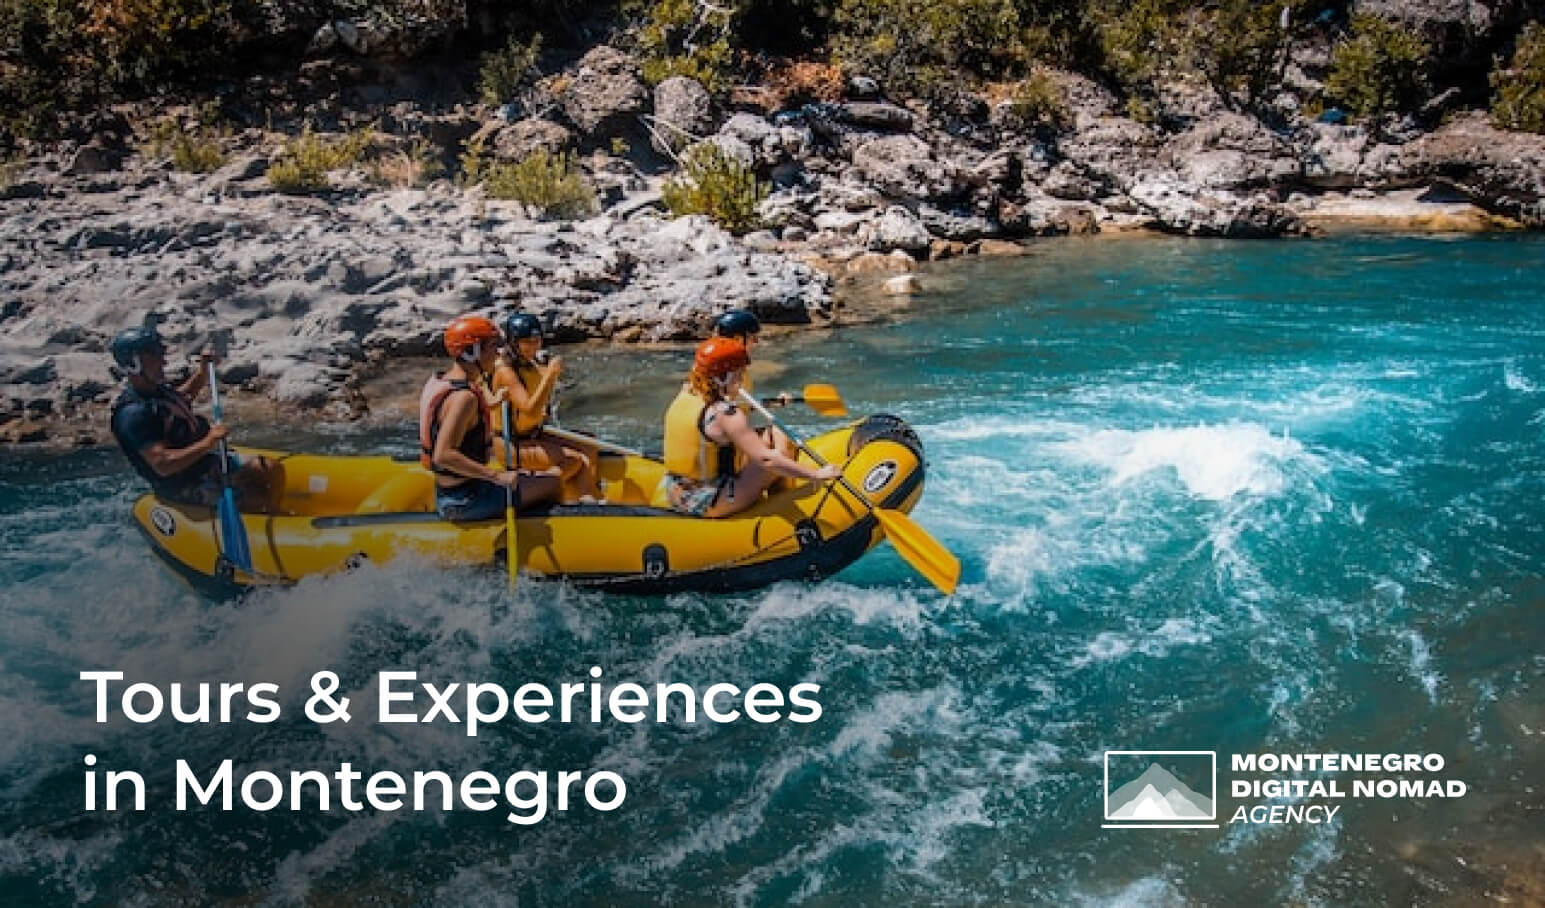 Image of river rafting in Tara Valley, Montenegro. Text overlay reads - Tours and Experiences in Montenegro